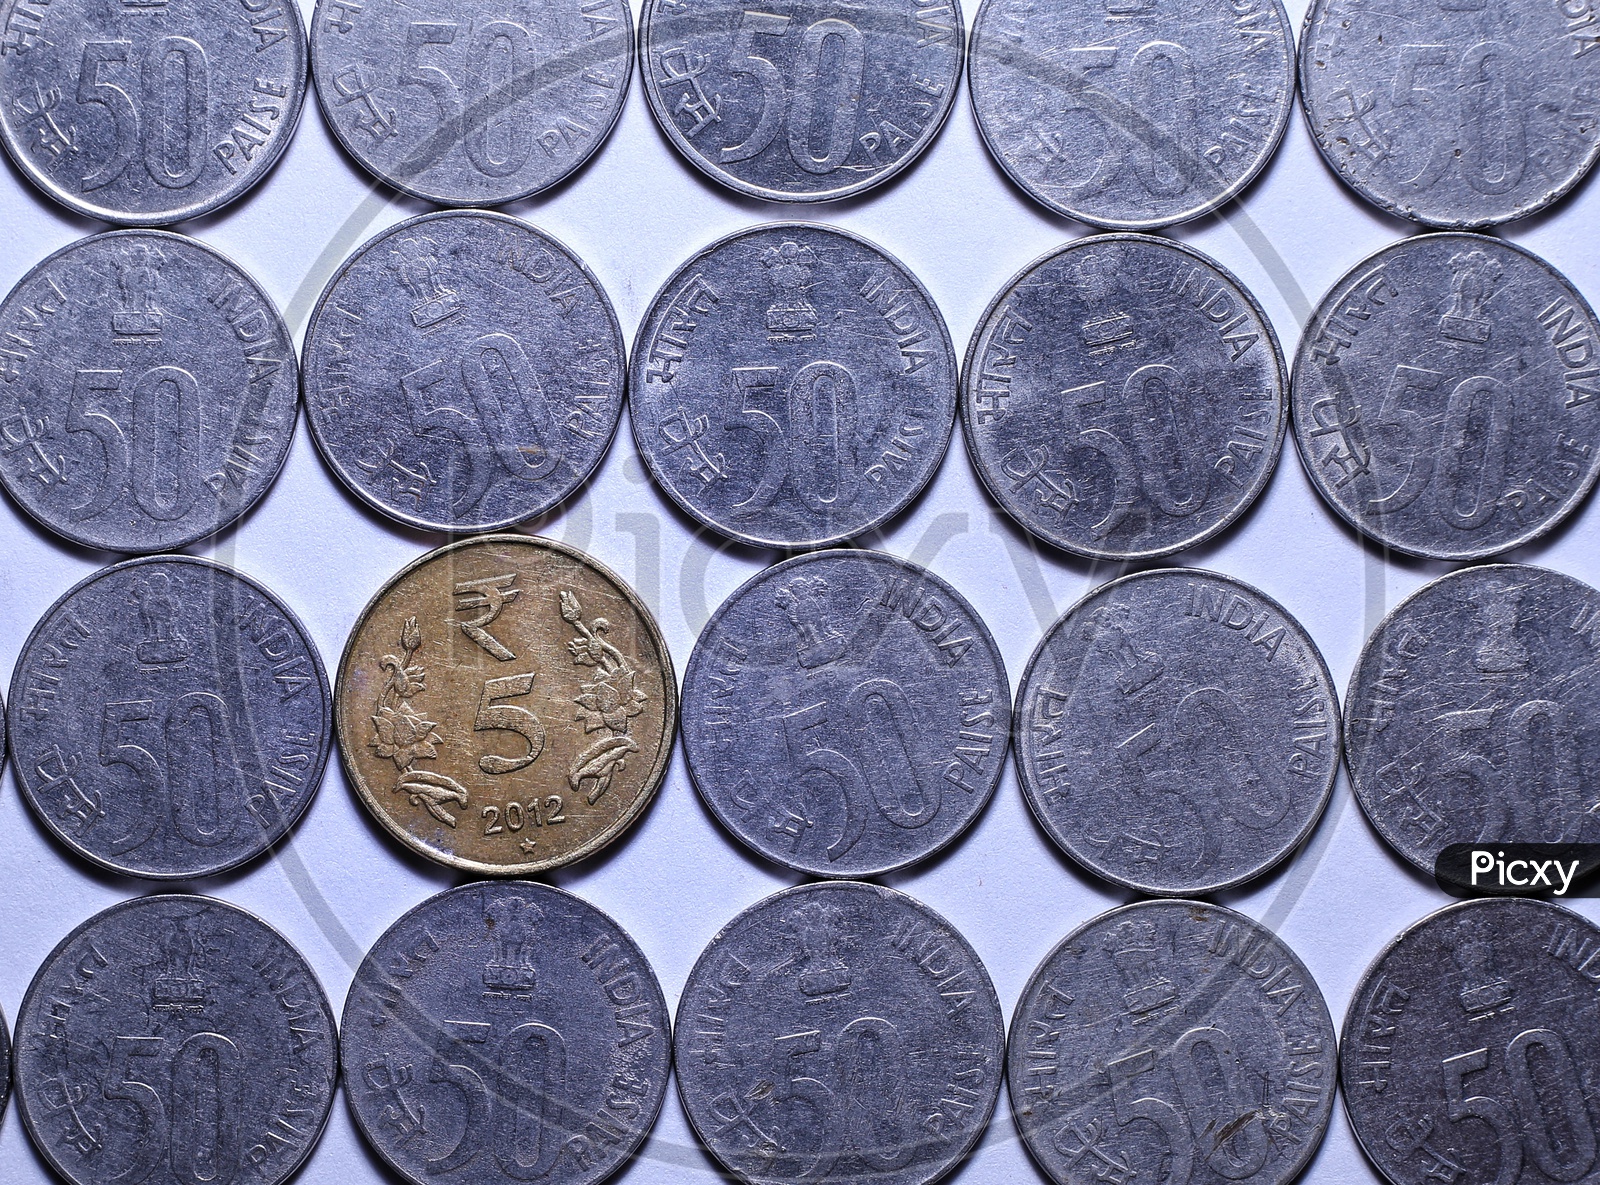 Indian currency coins